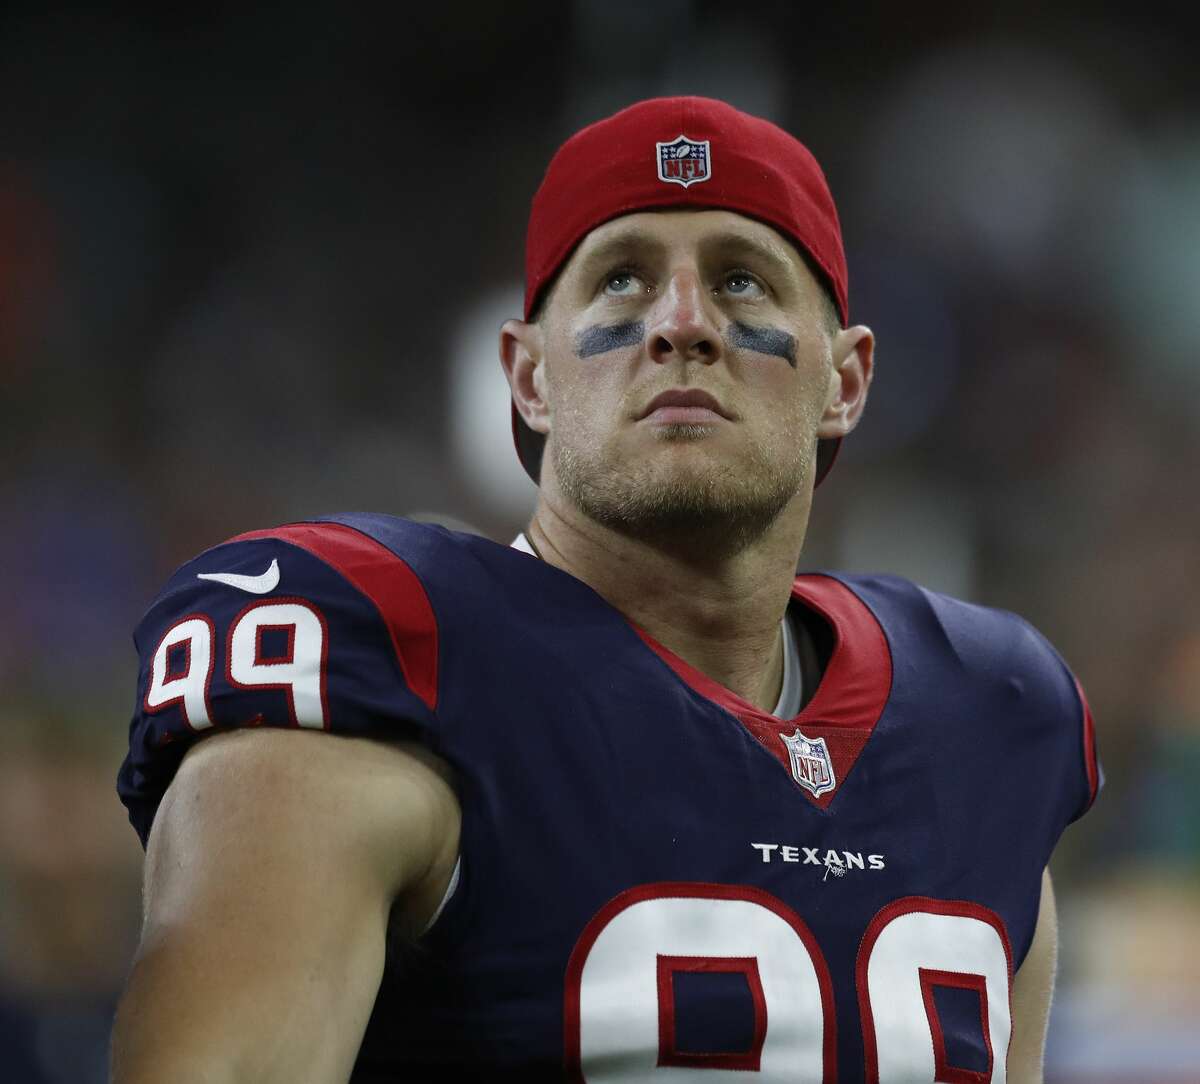 J.J. Watt's fundraising goals for victims of Hurricane Harvey have been shattered. Initially, he hoped to raise $200,000. As of Tuesday afternoon the total is more than $3 million.